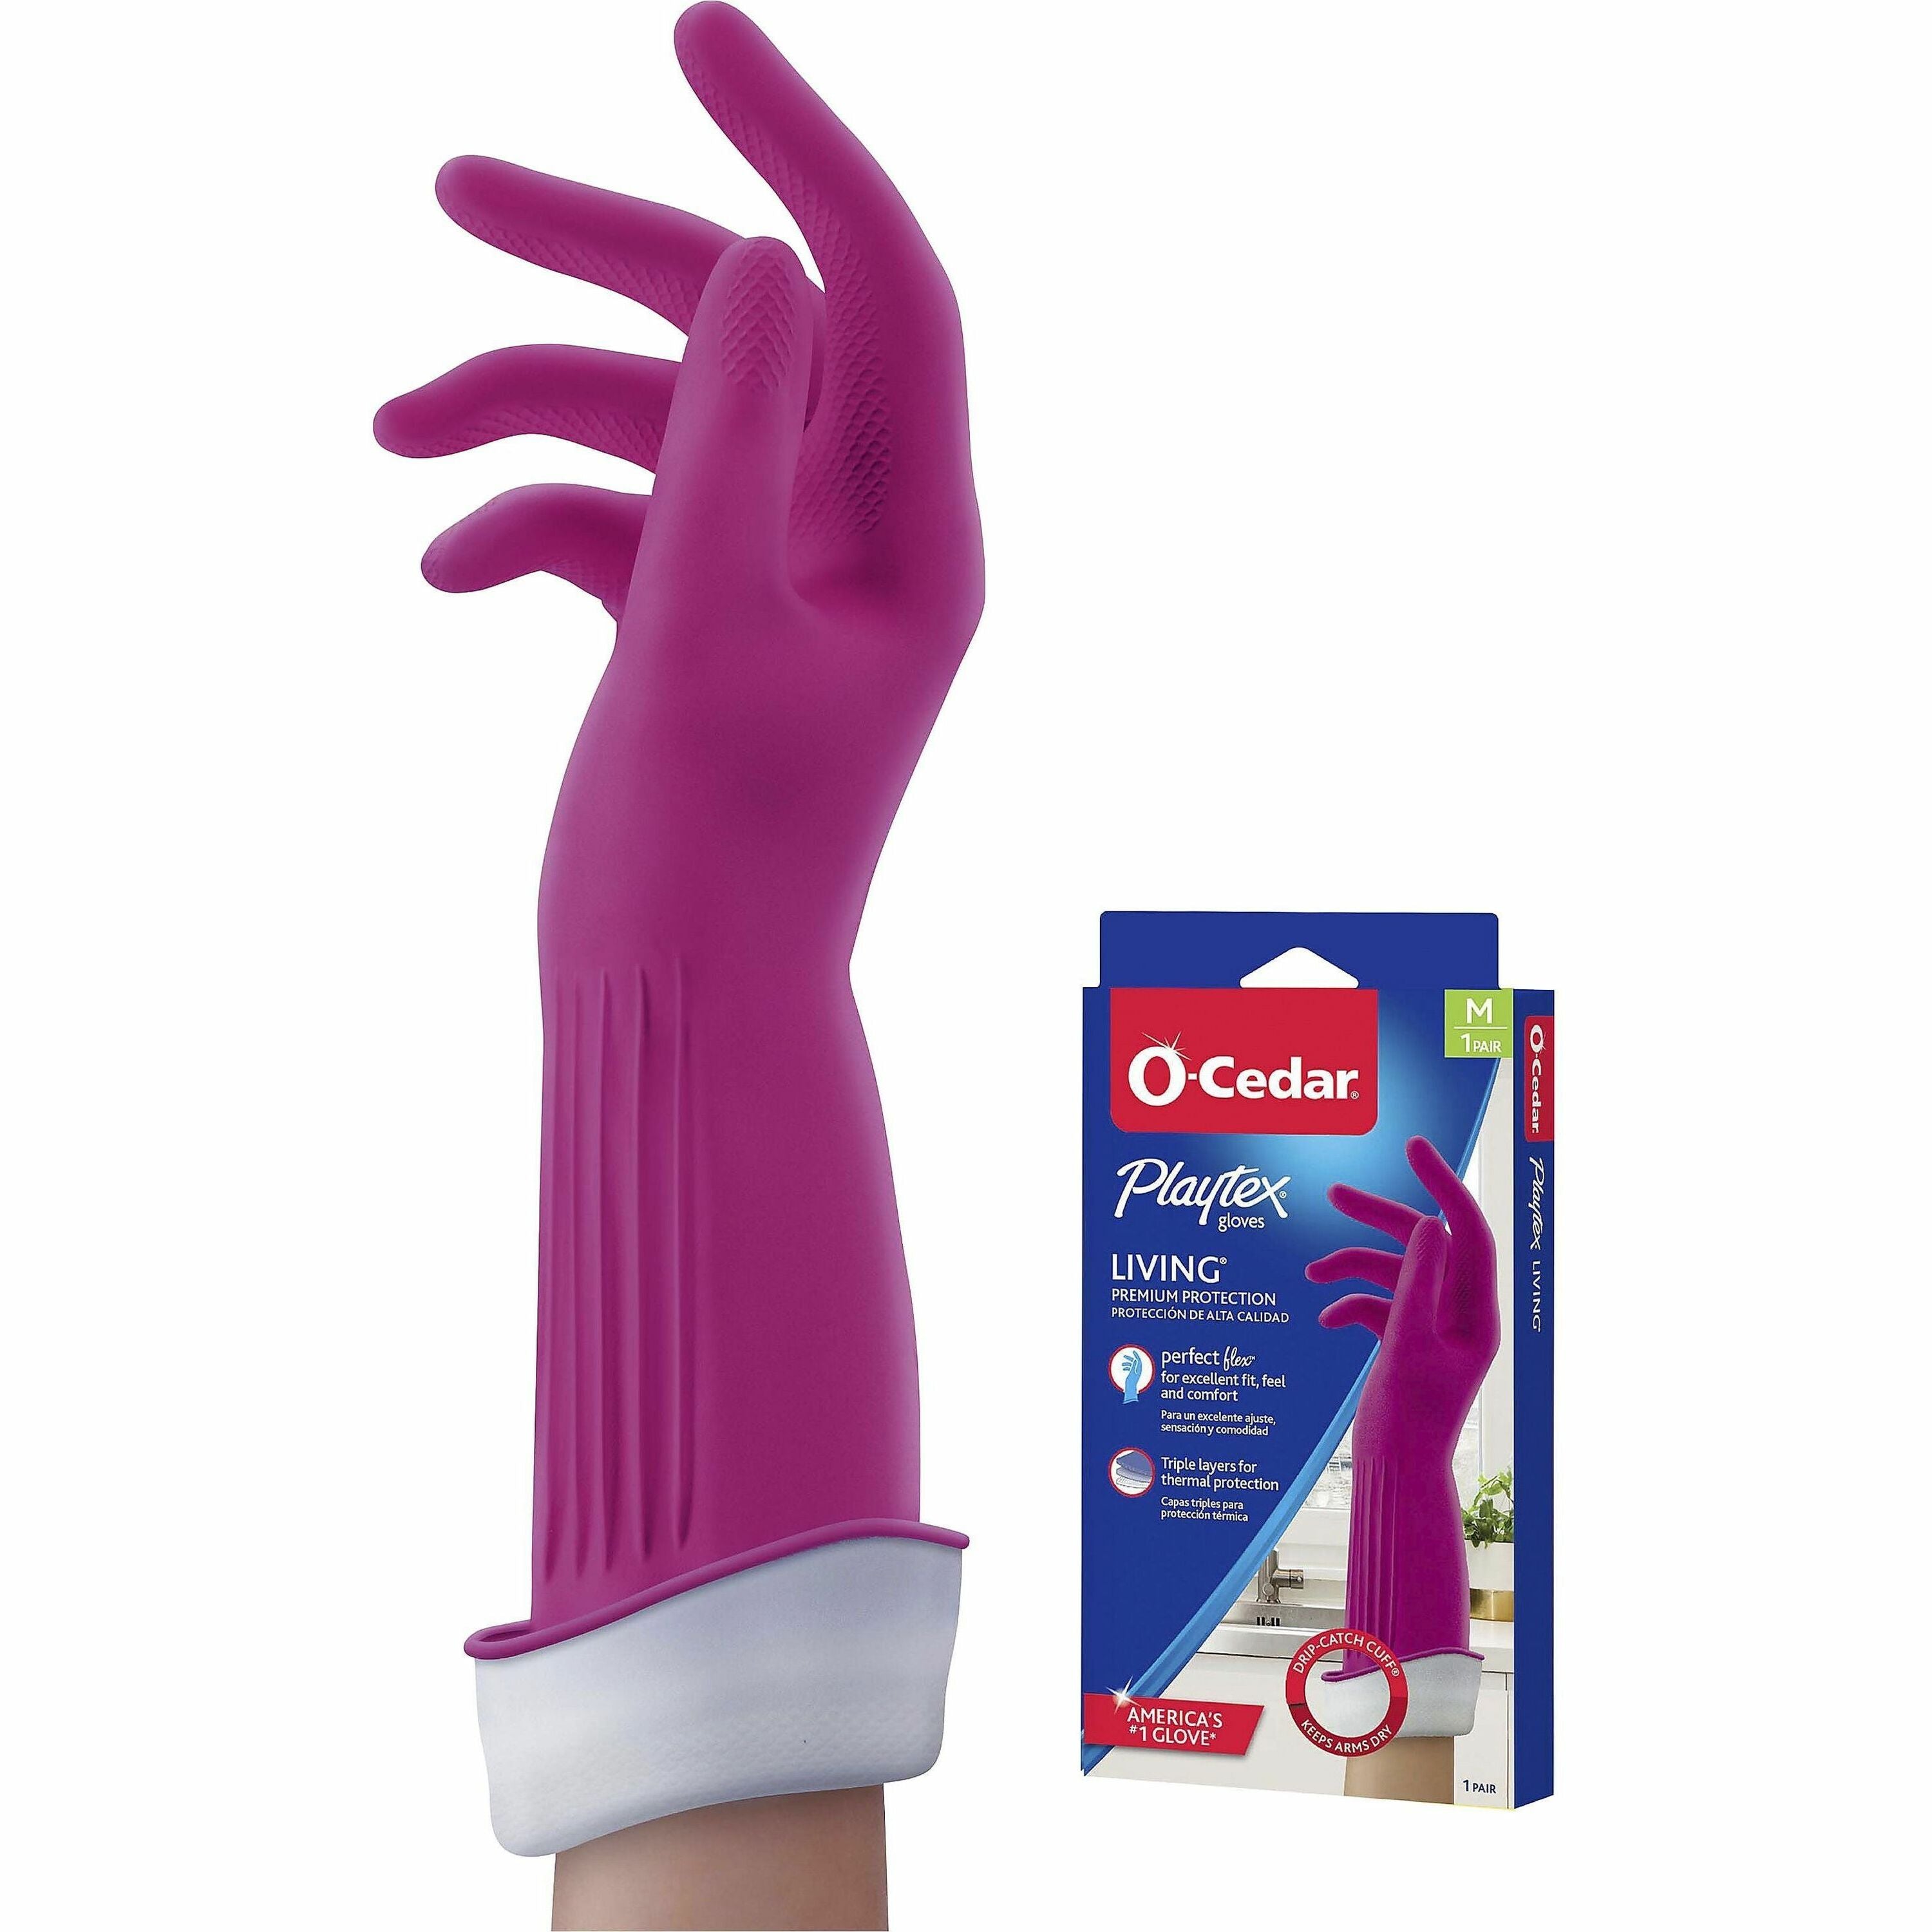 o-cedar-playtex-living-gloves-chemical-bacteria-protection-medium-size-latex-neoprene-nitrile-pink-anti-microbial-reusable-durable-comfortable-odor-resistant-textured-palm-textured-fingertip-for-household-cleaning-2-pair-1_fhp166119 - 1